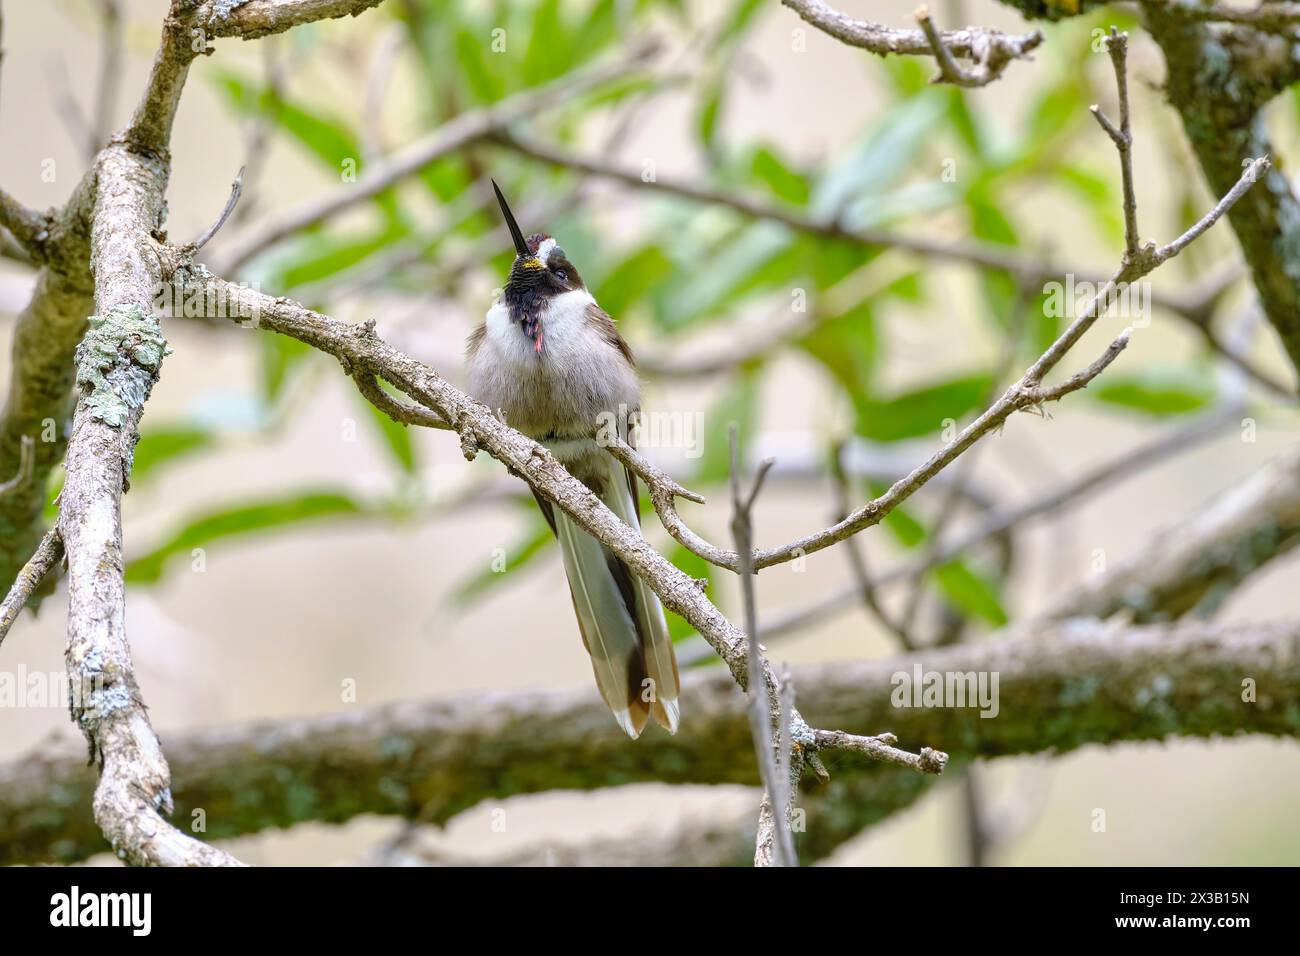 Bearded Mountaineer (Oreonympha nobilis albolimpata), beautiful specimen of this species of hummingbird perched on a branch, this species is endemic t Stock Photo